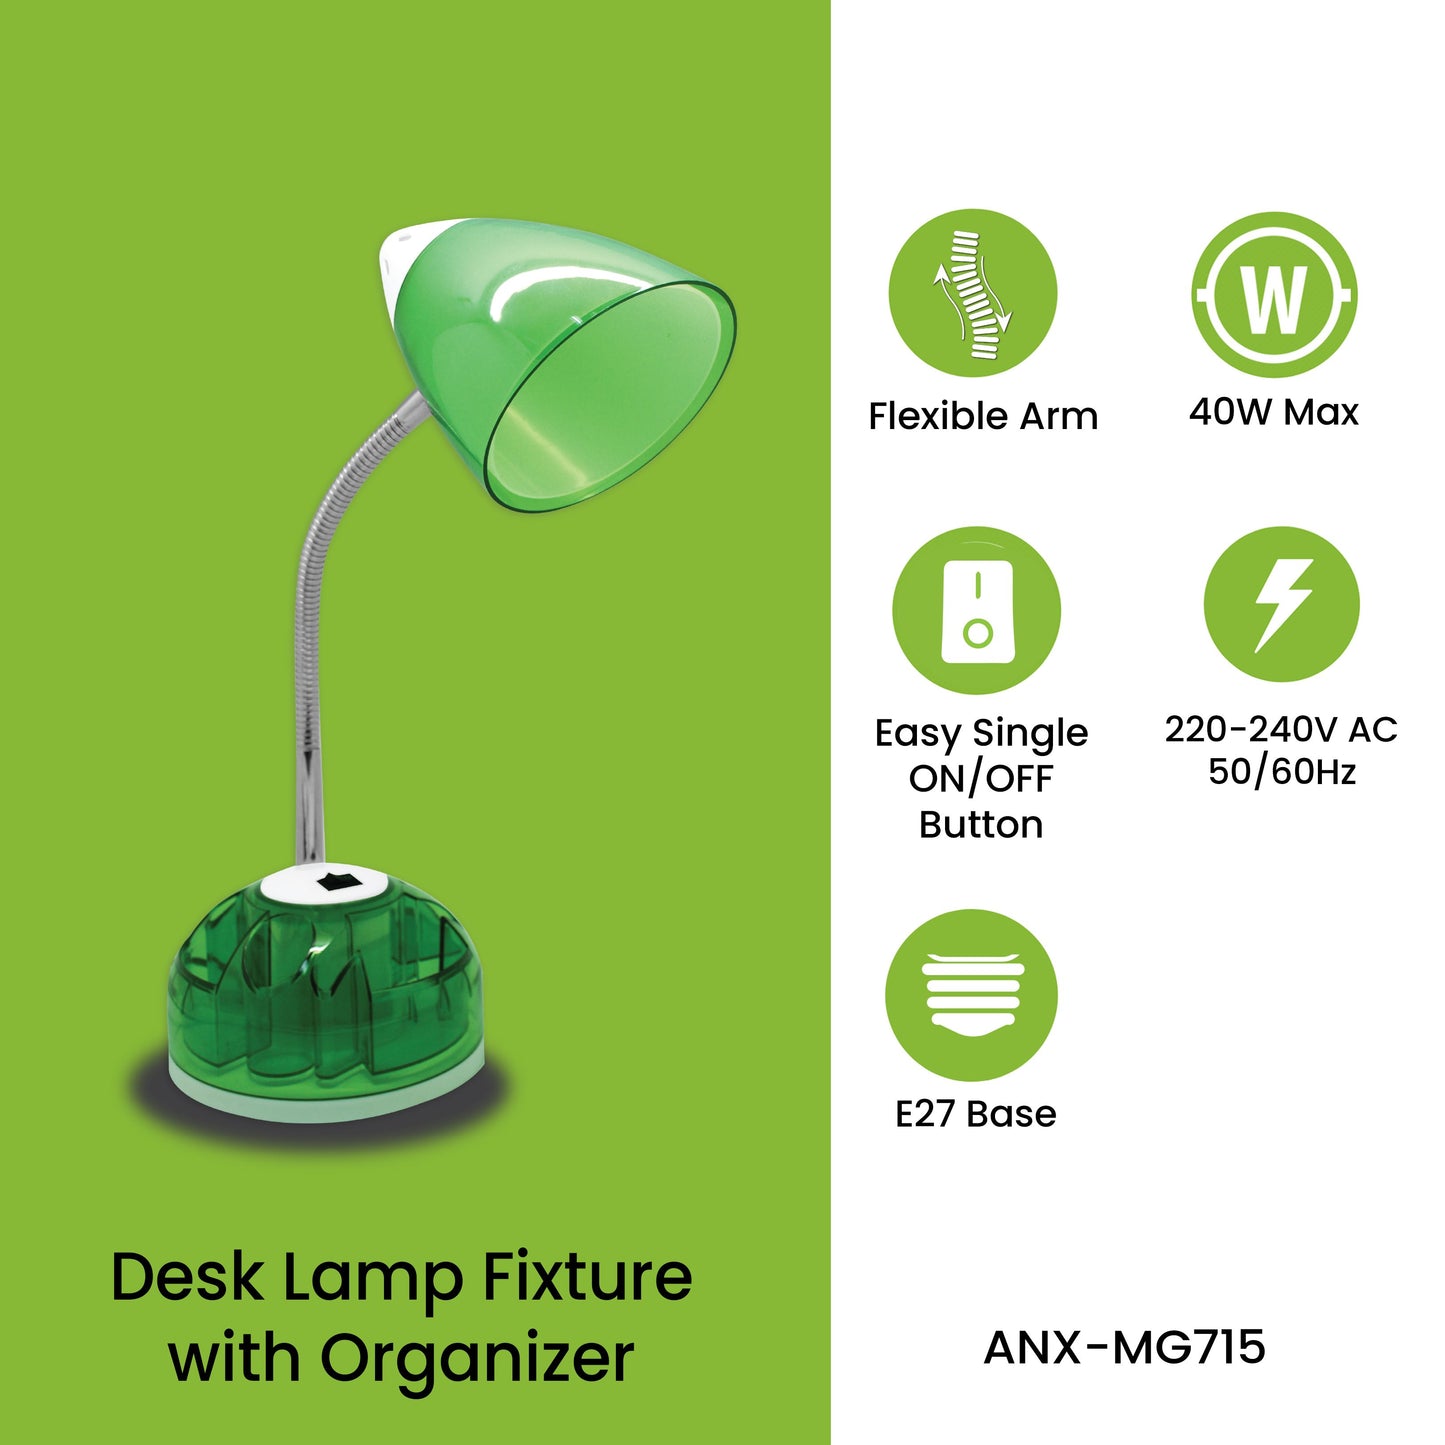 Nxled Desk Lamp Fixture With Organizer (ANX-MG715)